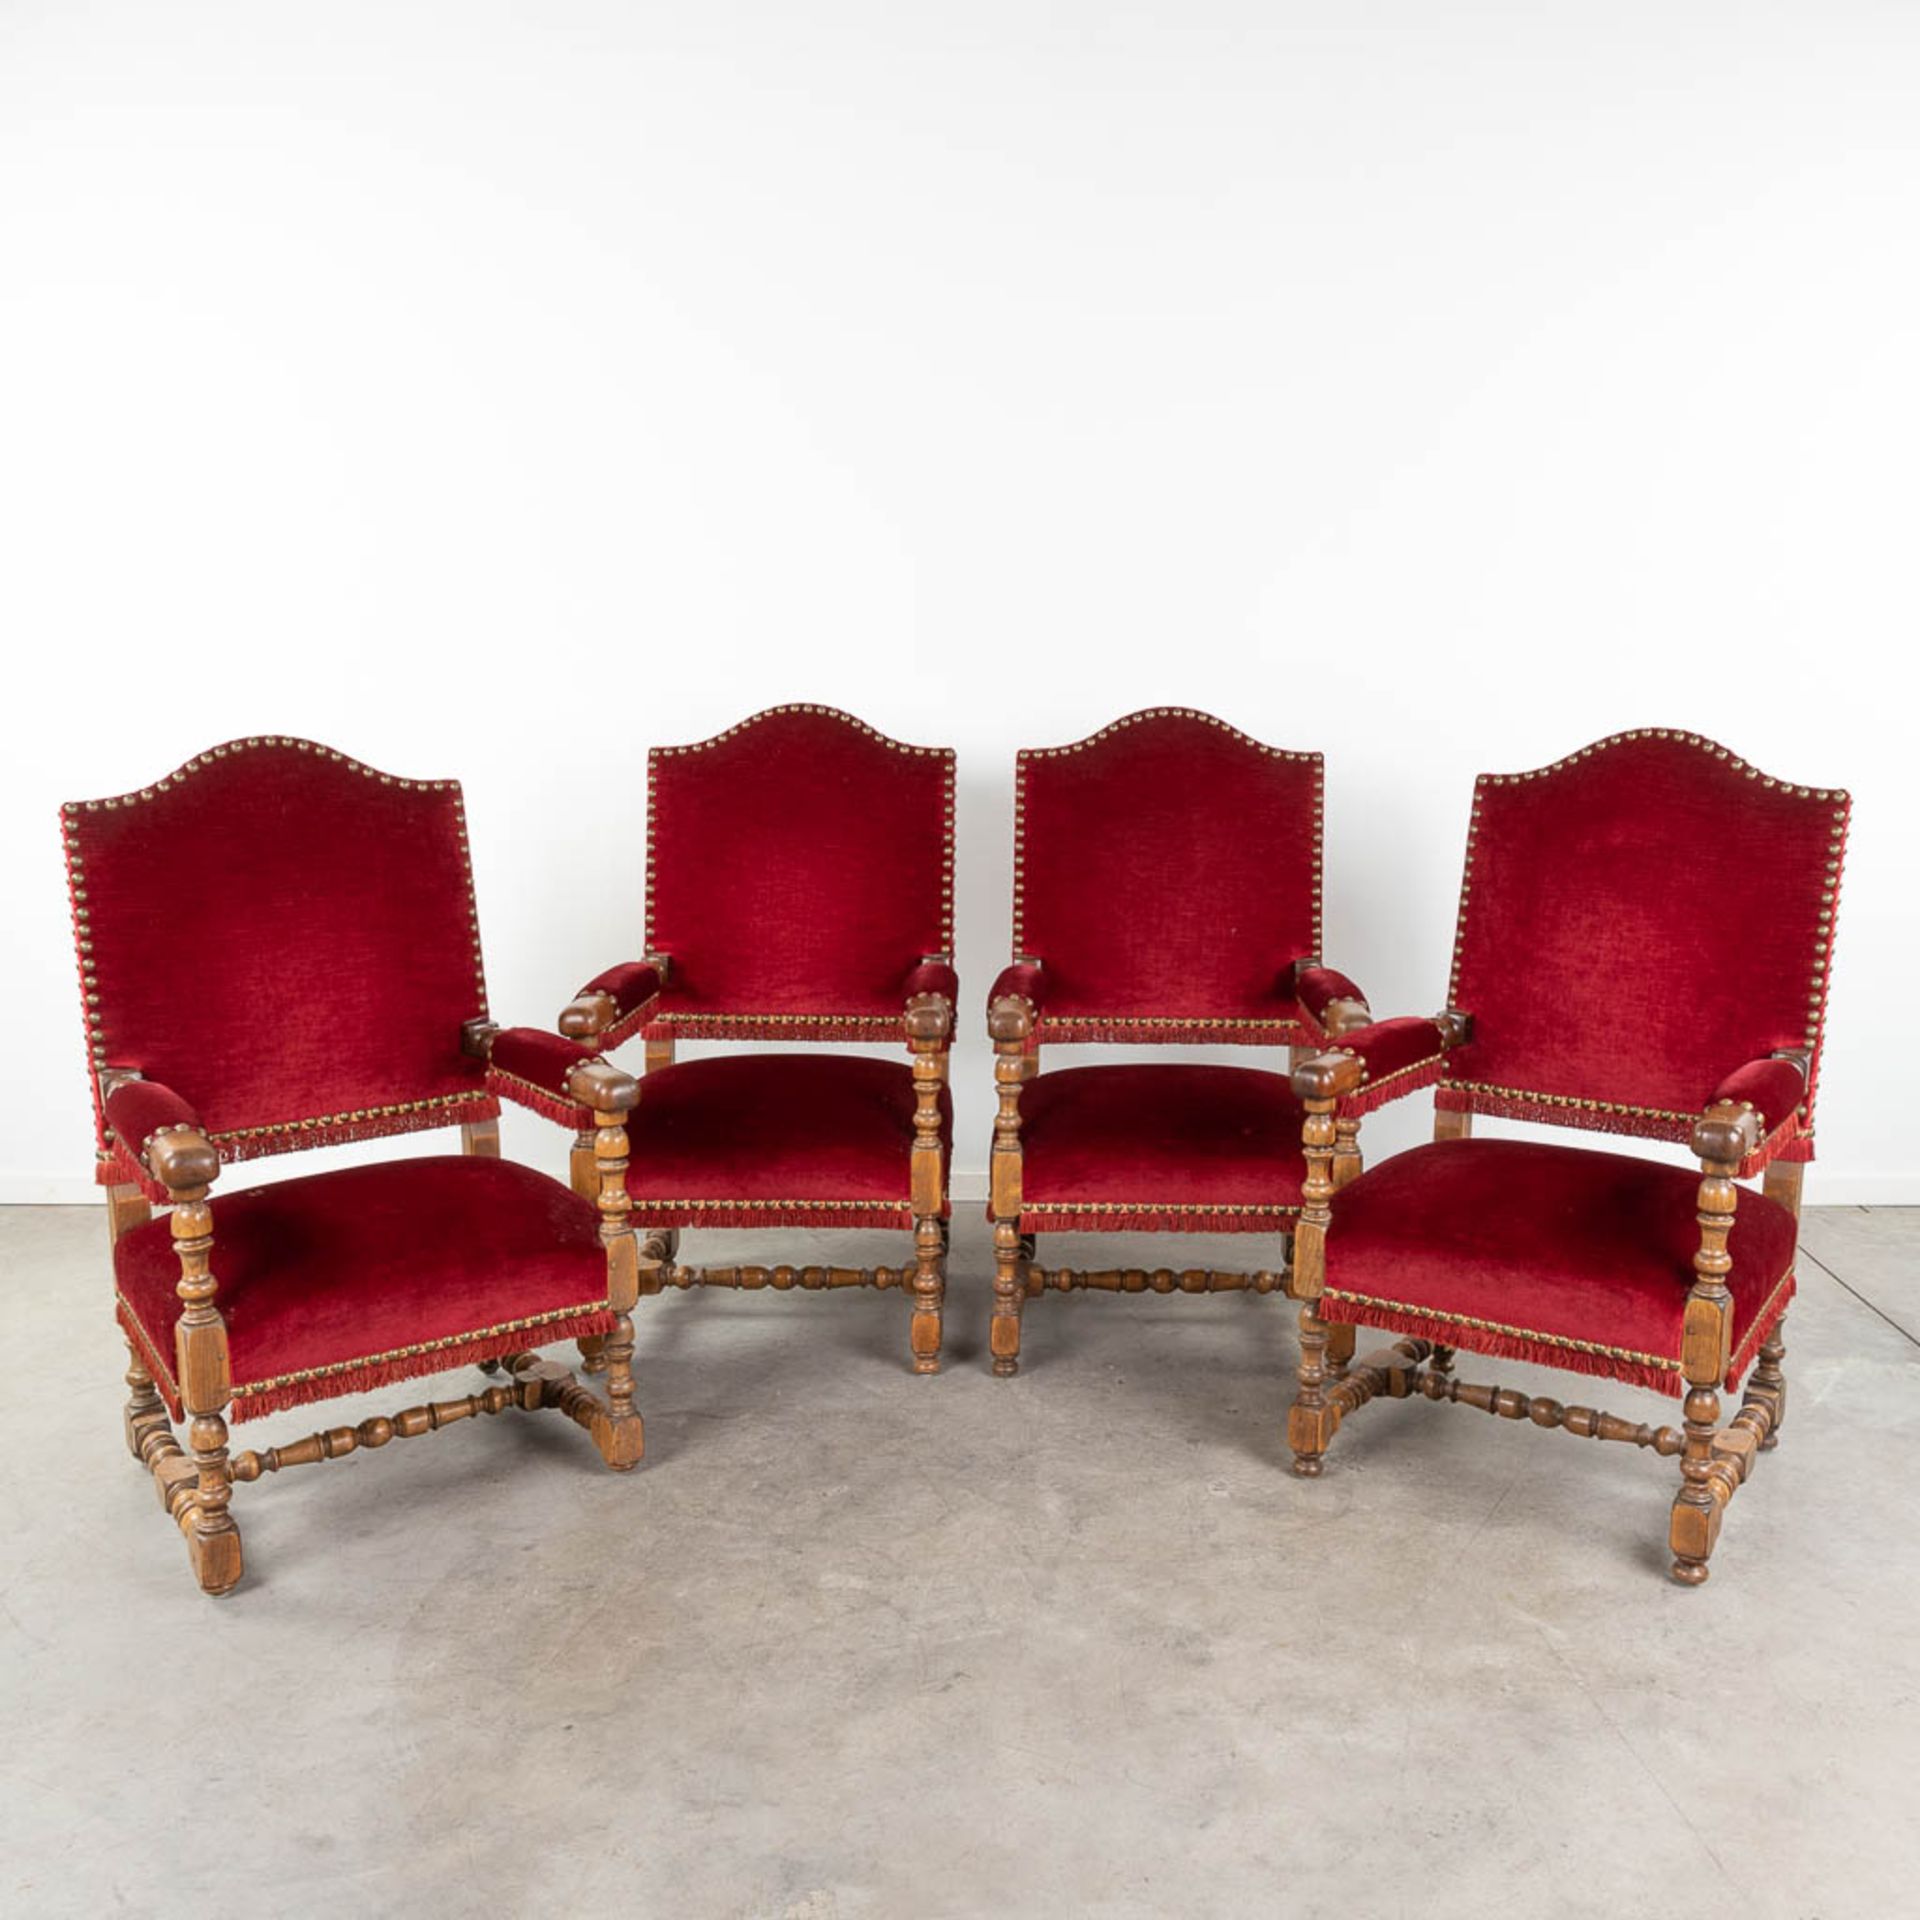 A set of 4 armchairs finished with red fabric. (L:70 x W:66 x H:115 cm)